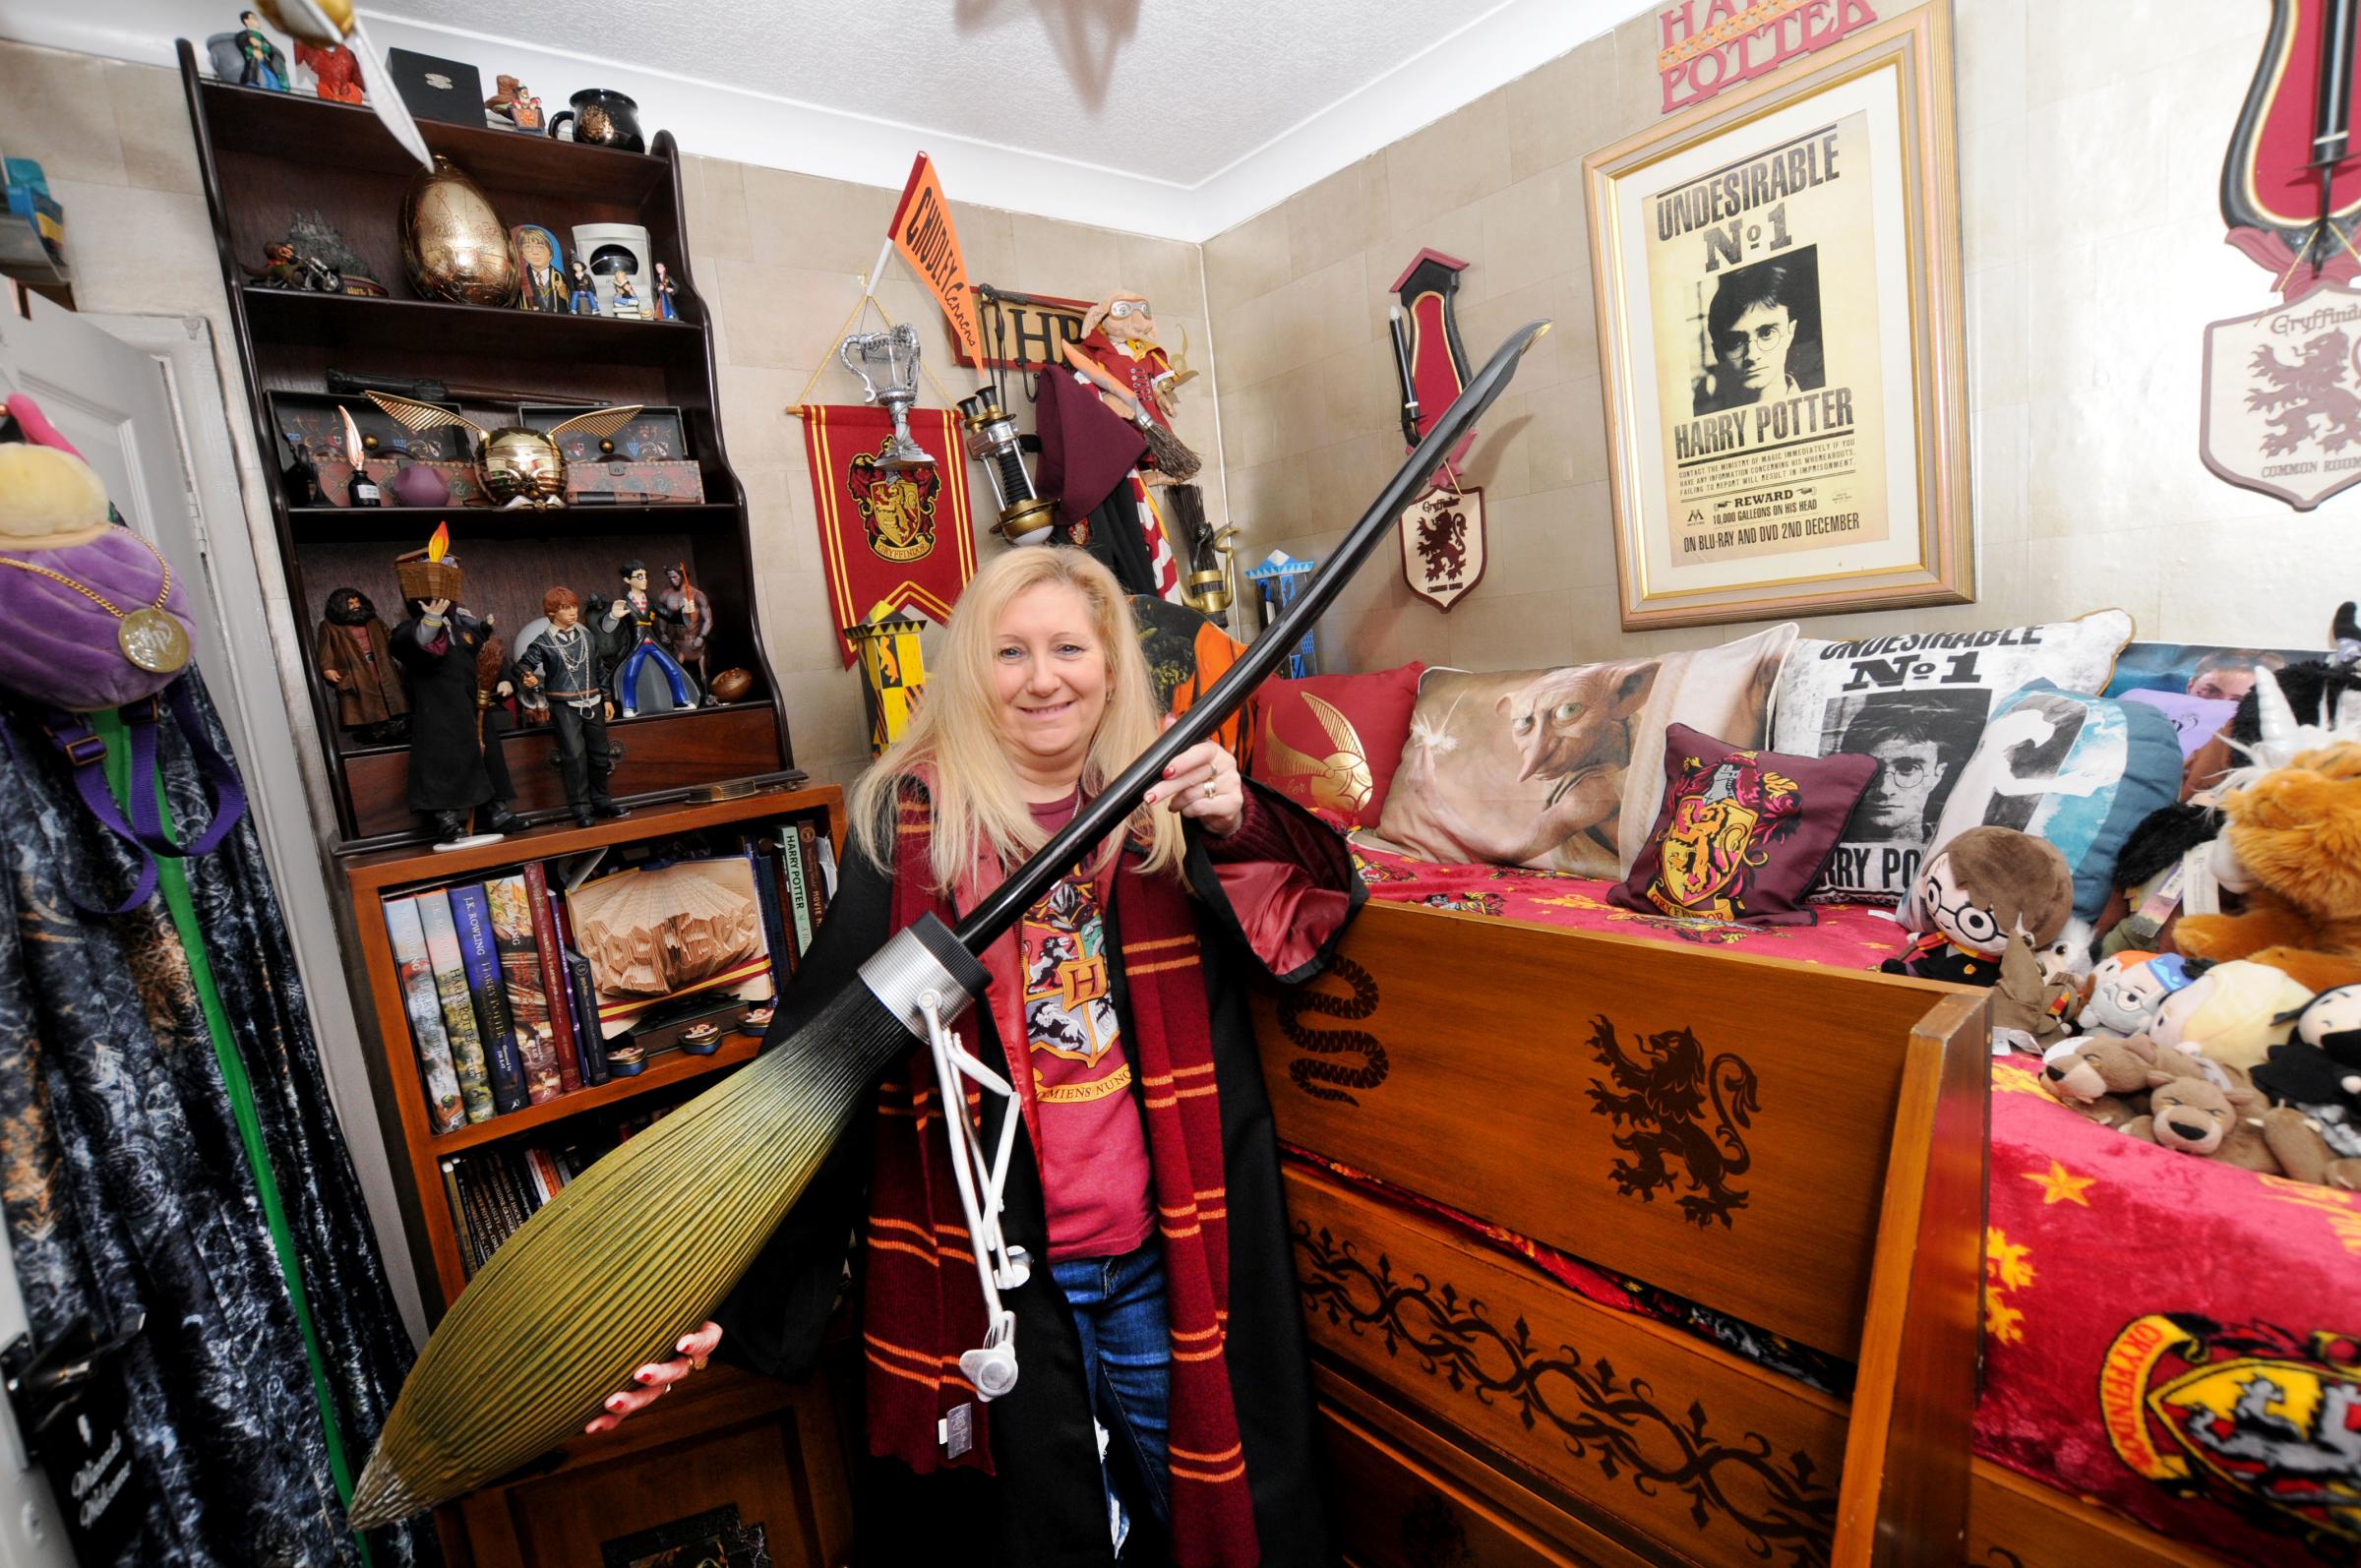 Janice Burnetts amazing Harry Potter collection, pictures; Dave Gillespie